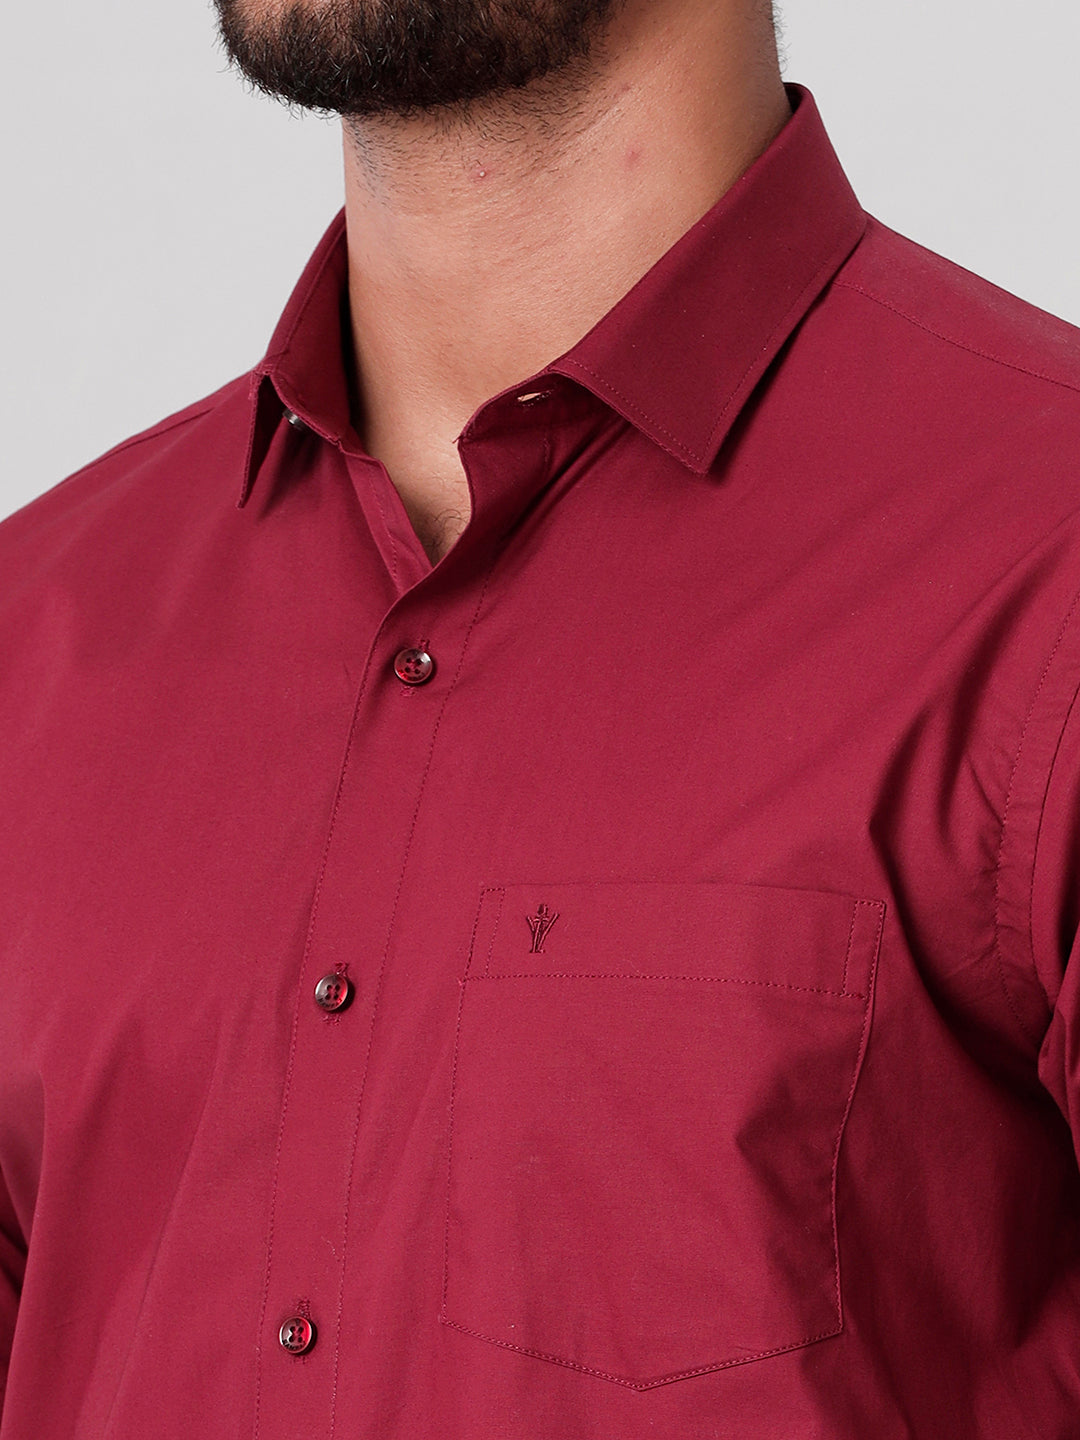 Mens Formal Cotton Spandex 2 Way Stretch Maroon Half Sleeves Shirt LY6-Zoom view